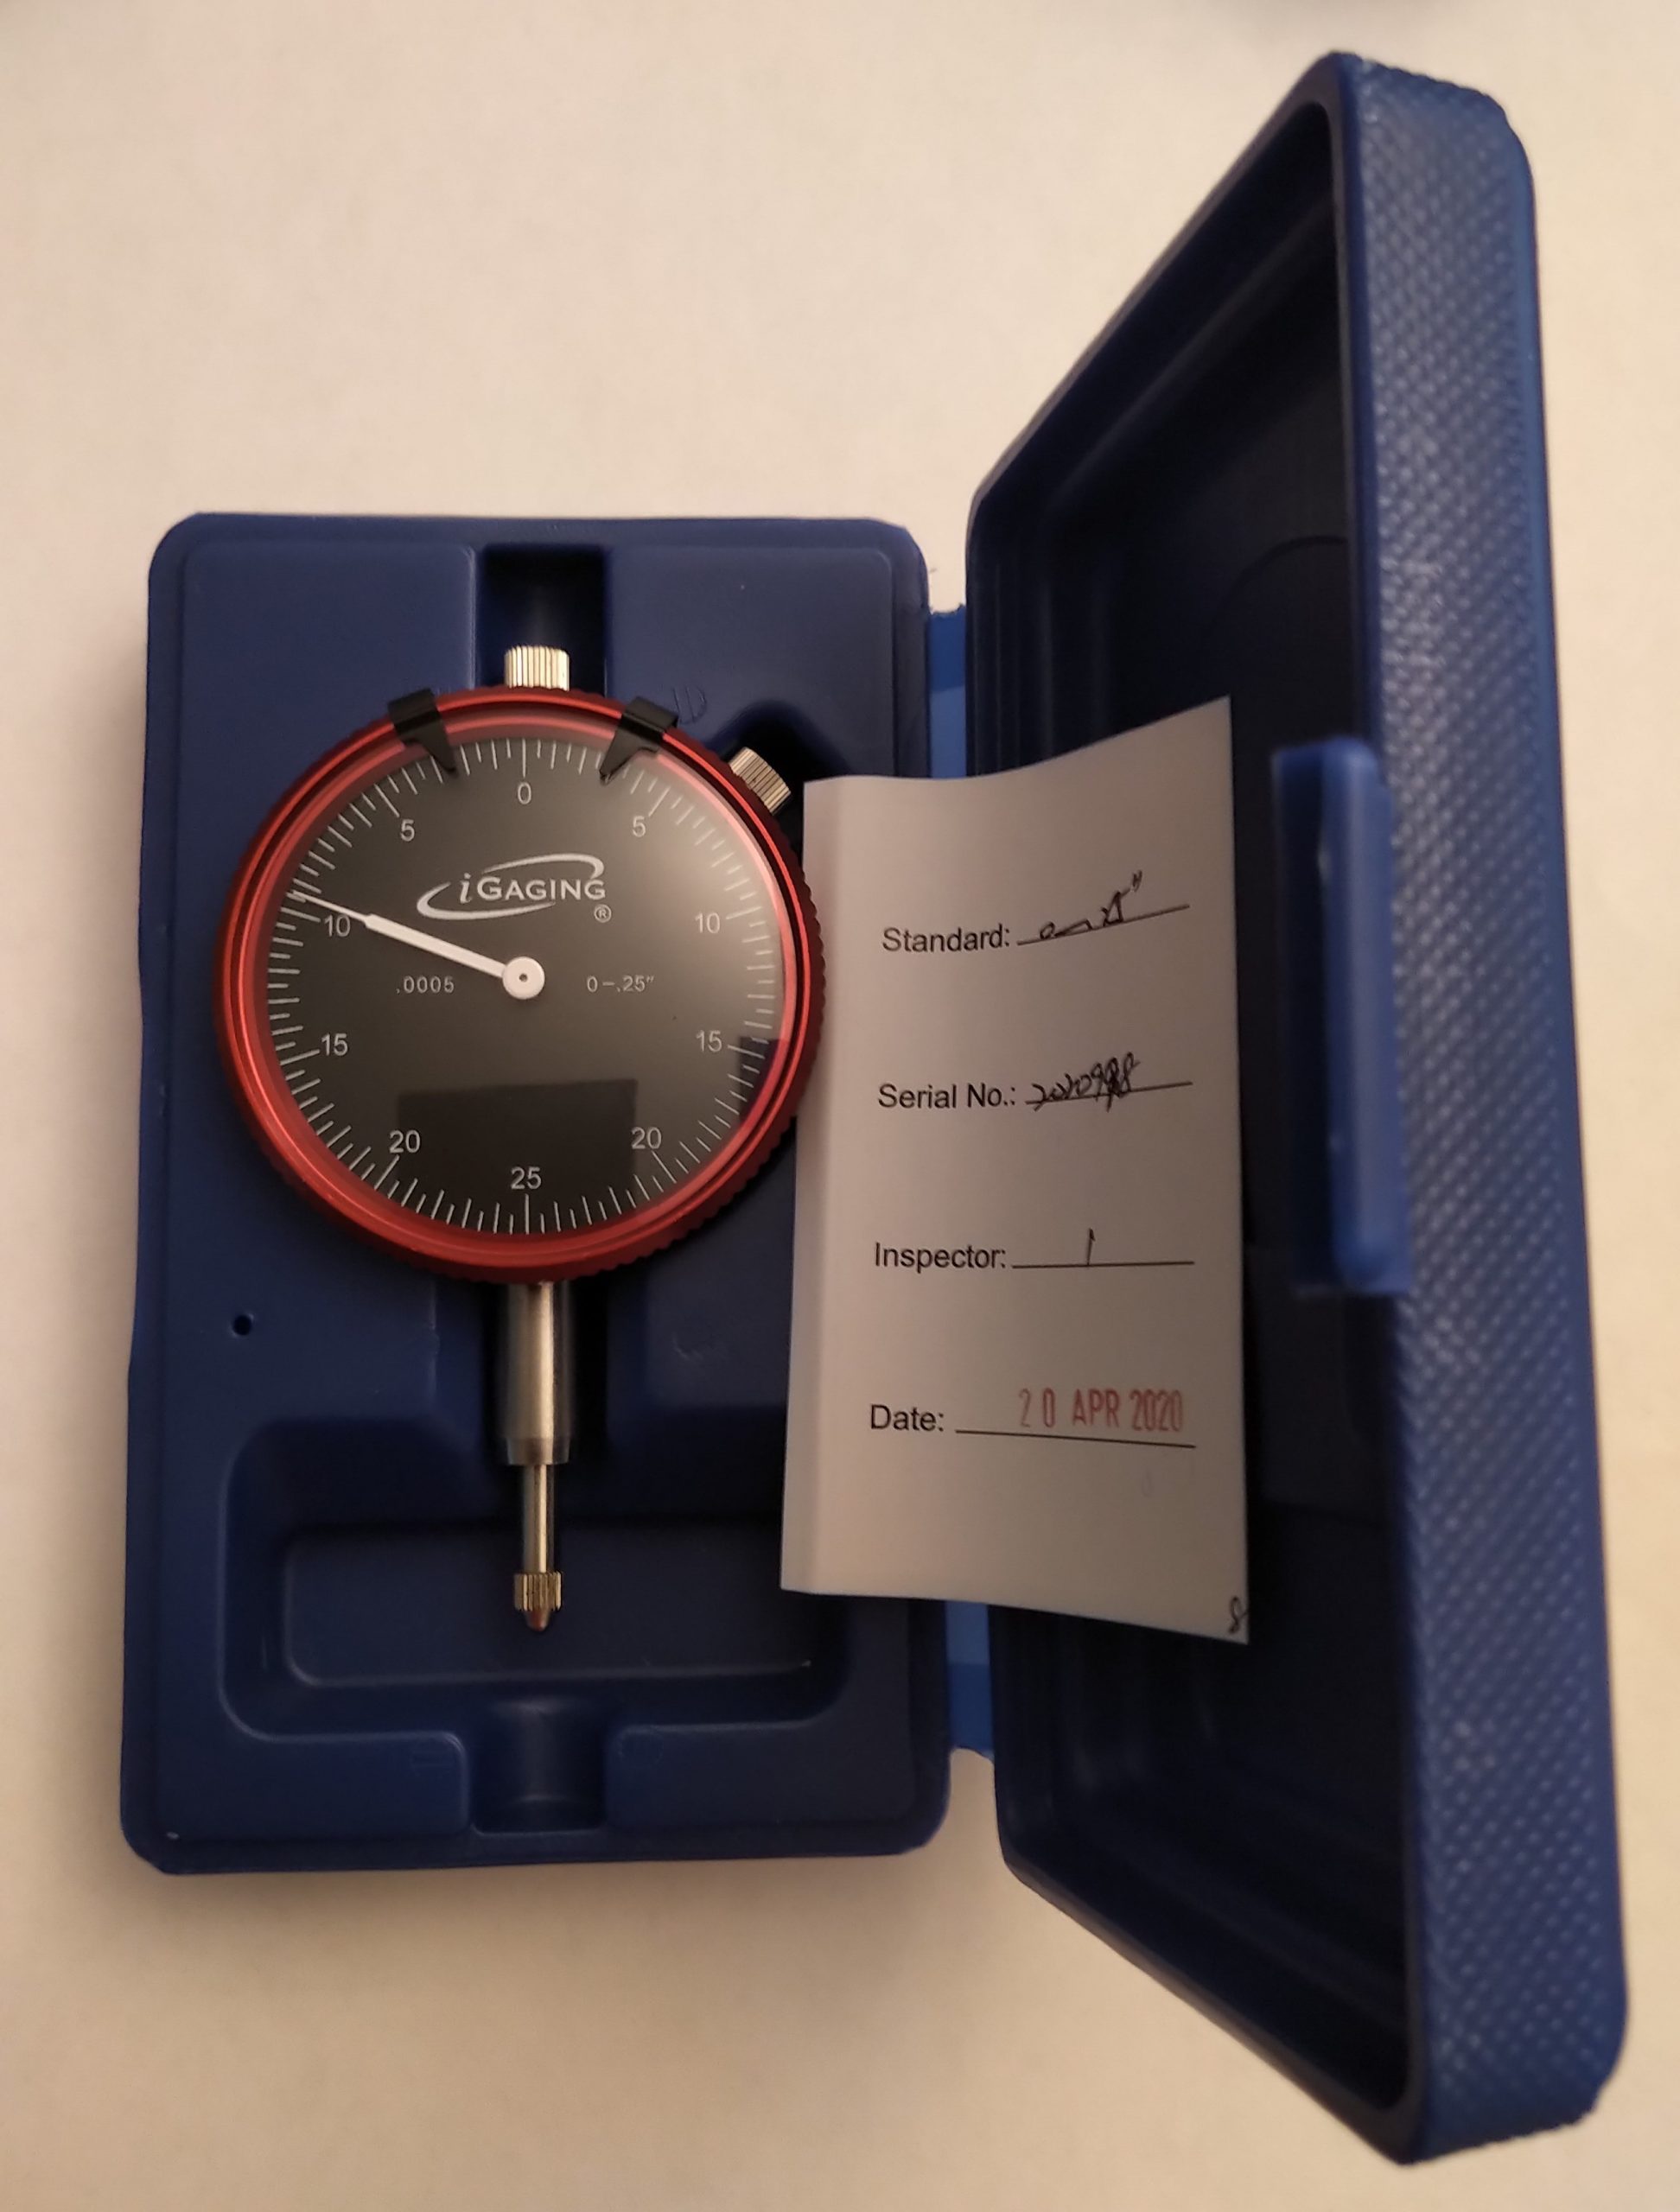 iGaging 0-.25" Red and Black Dial indicator 0.0005" resolution